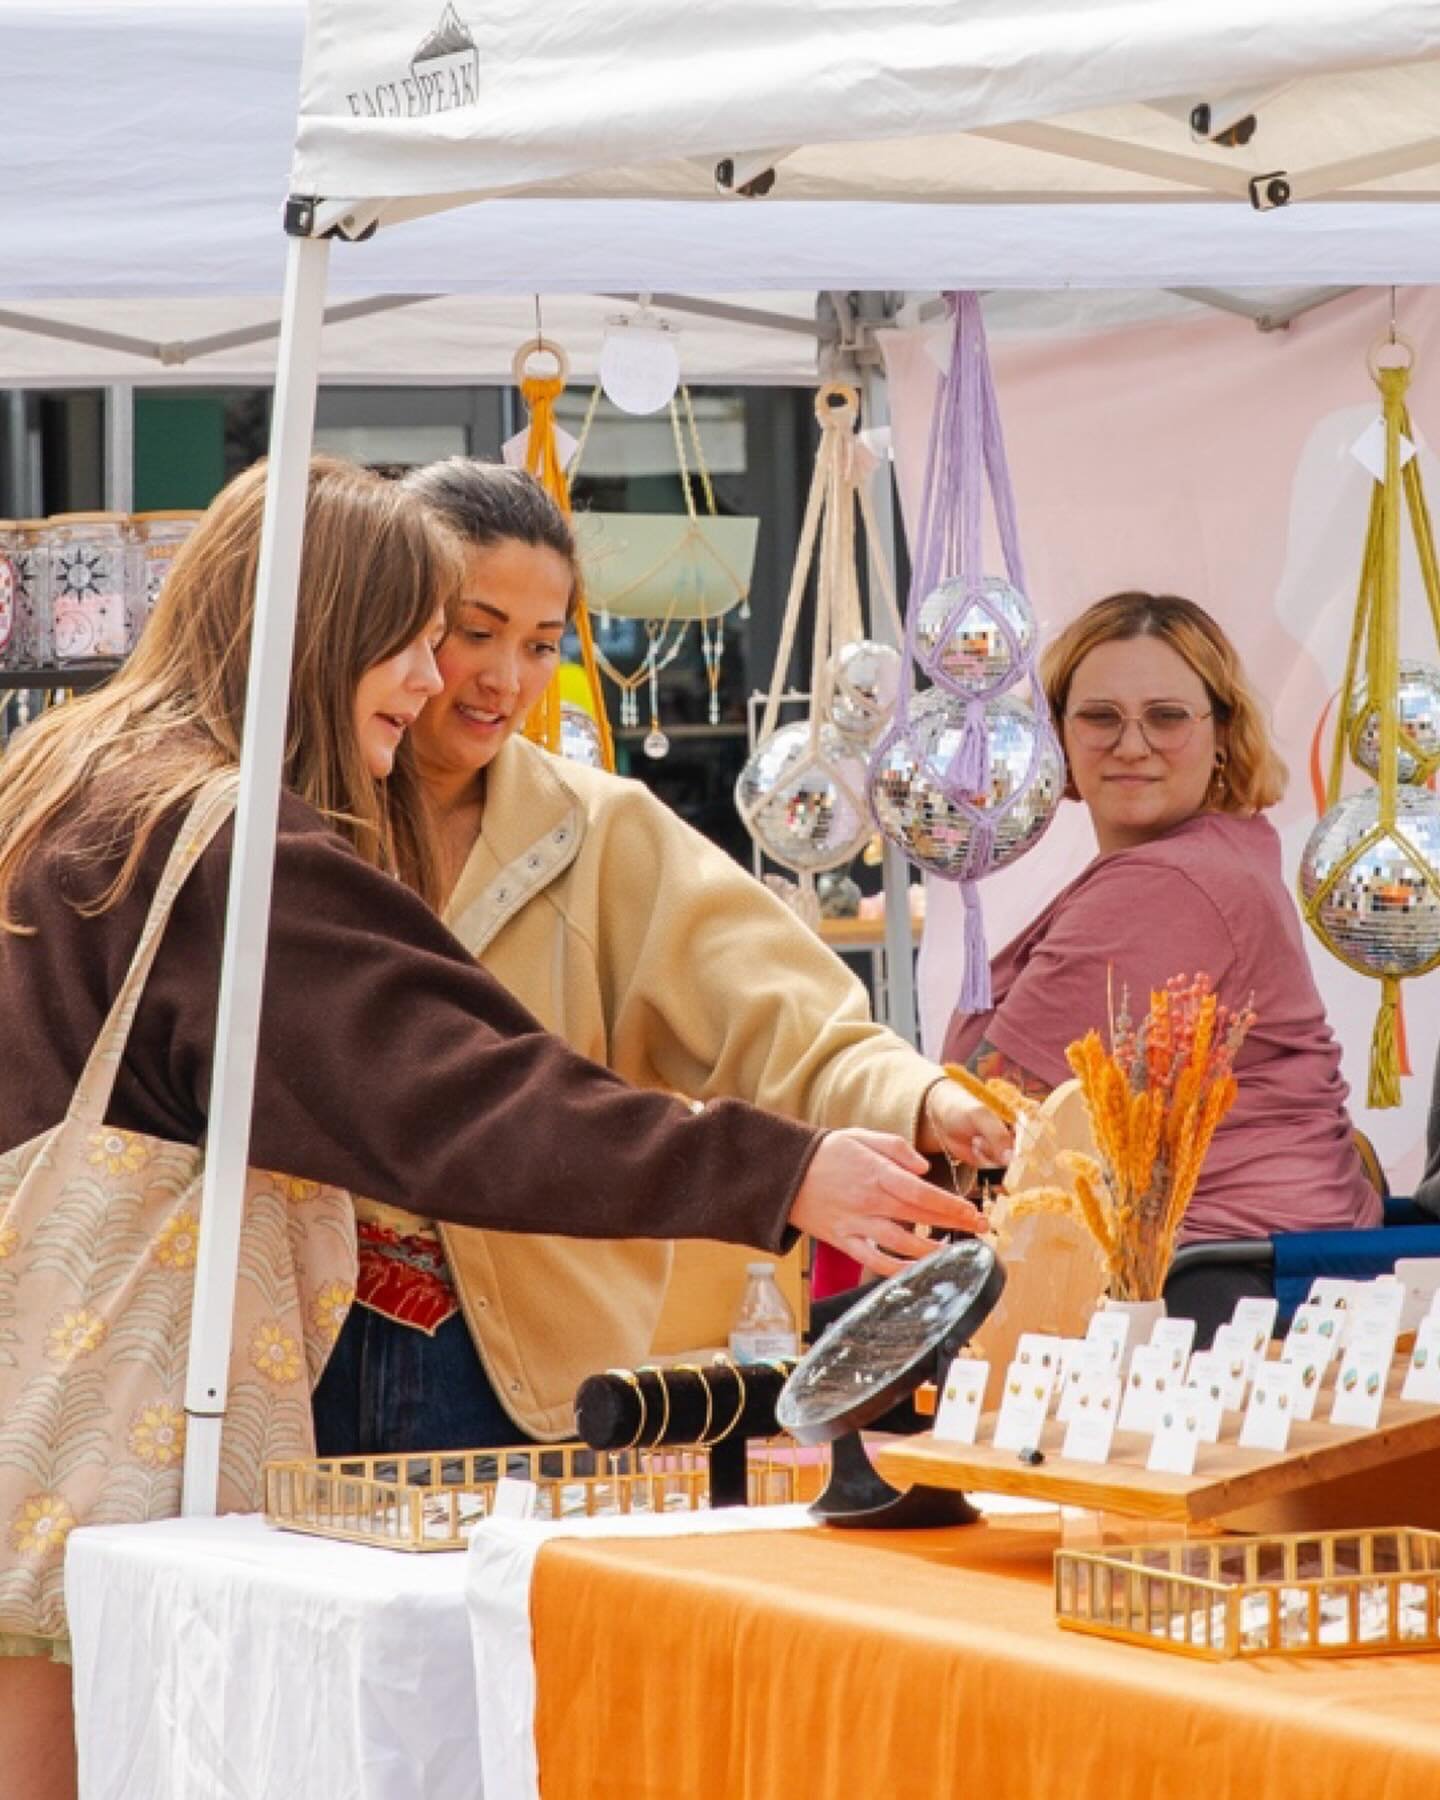 Grab a friend and JOIN US&hellip;.

For the perfect sunny Sunday in the City! ☀️🤗✨

Come find your special handmade treasure or one-of-a-kind find from one of the many Local Small Businesses &amp; Brands at HEAD WEST at the SF @ferrybuilding | THIS 